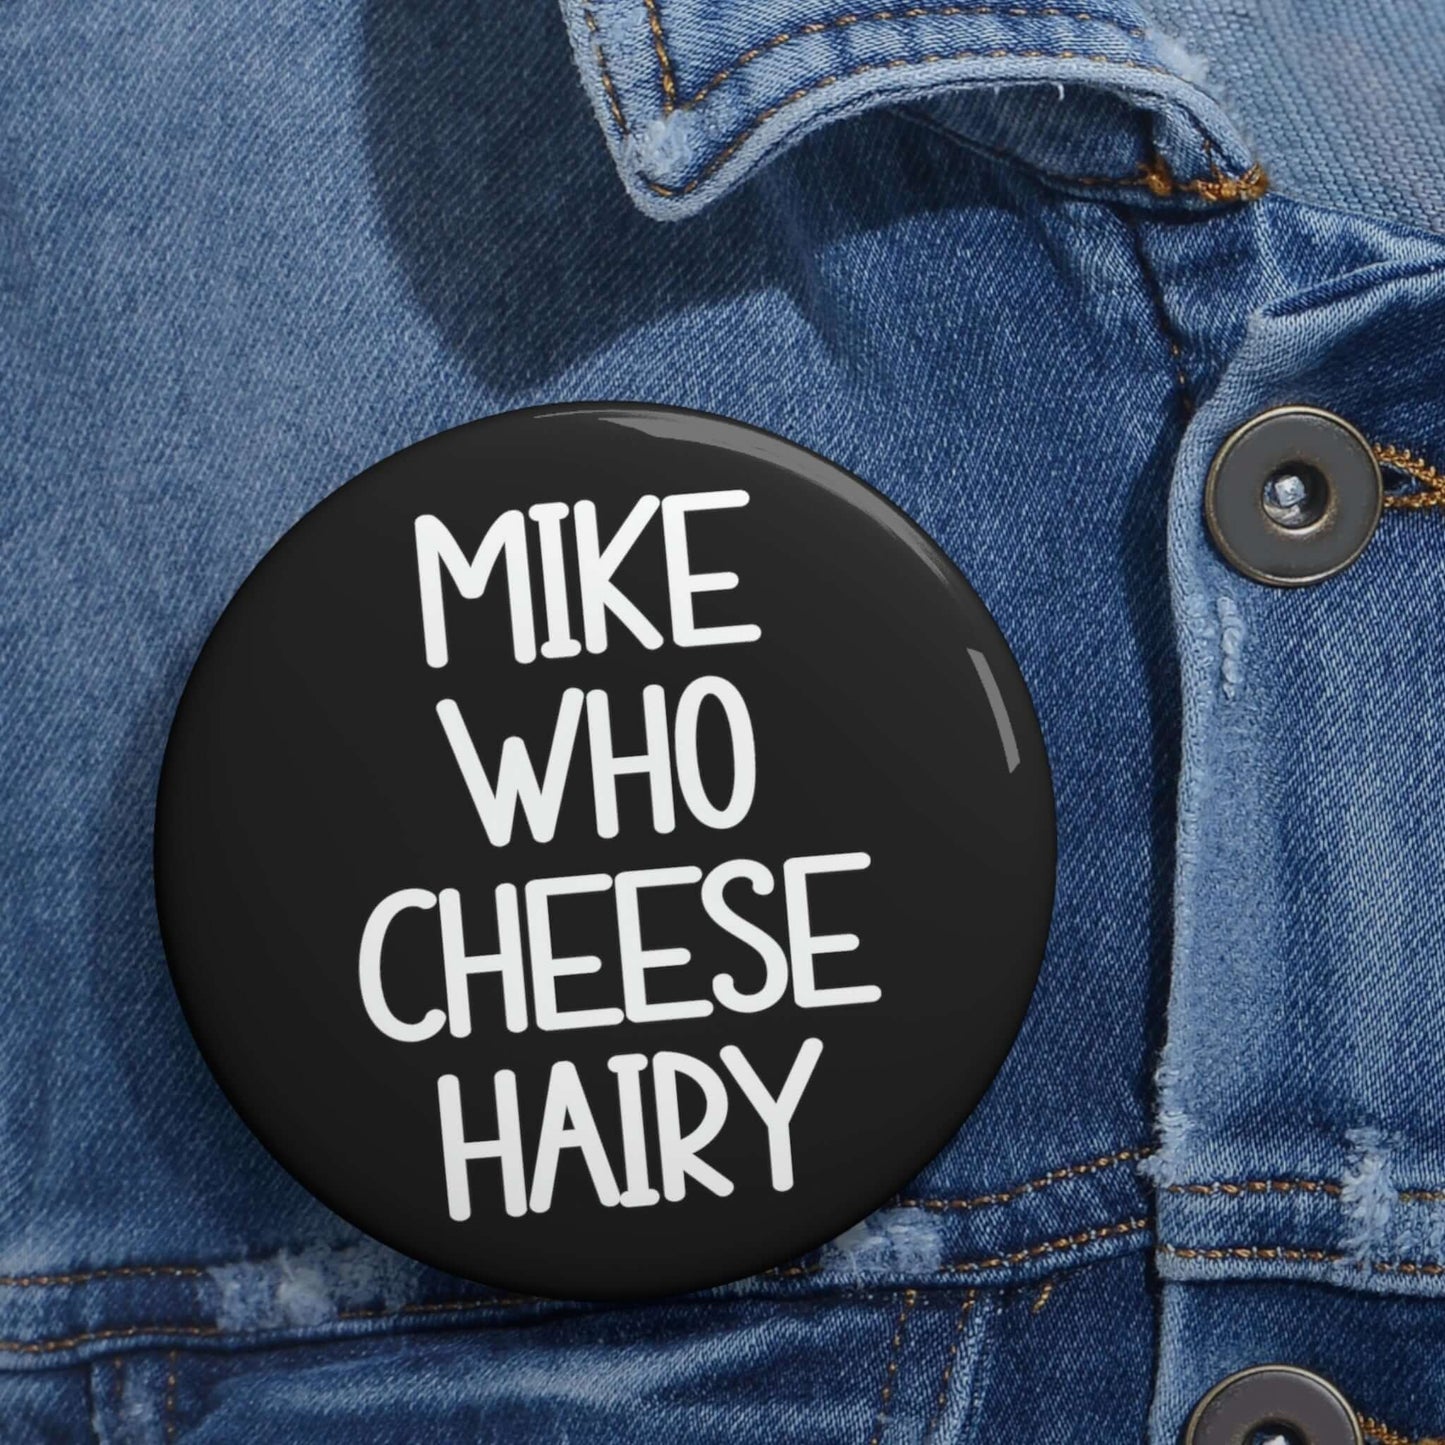 Mike who cheese hairy pinback button